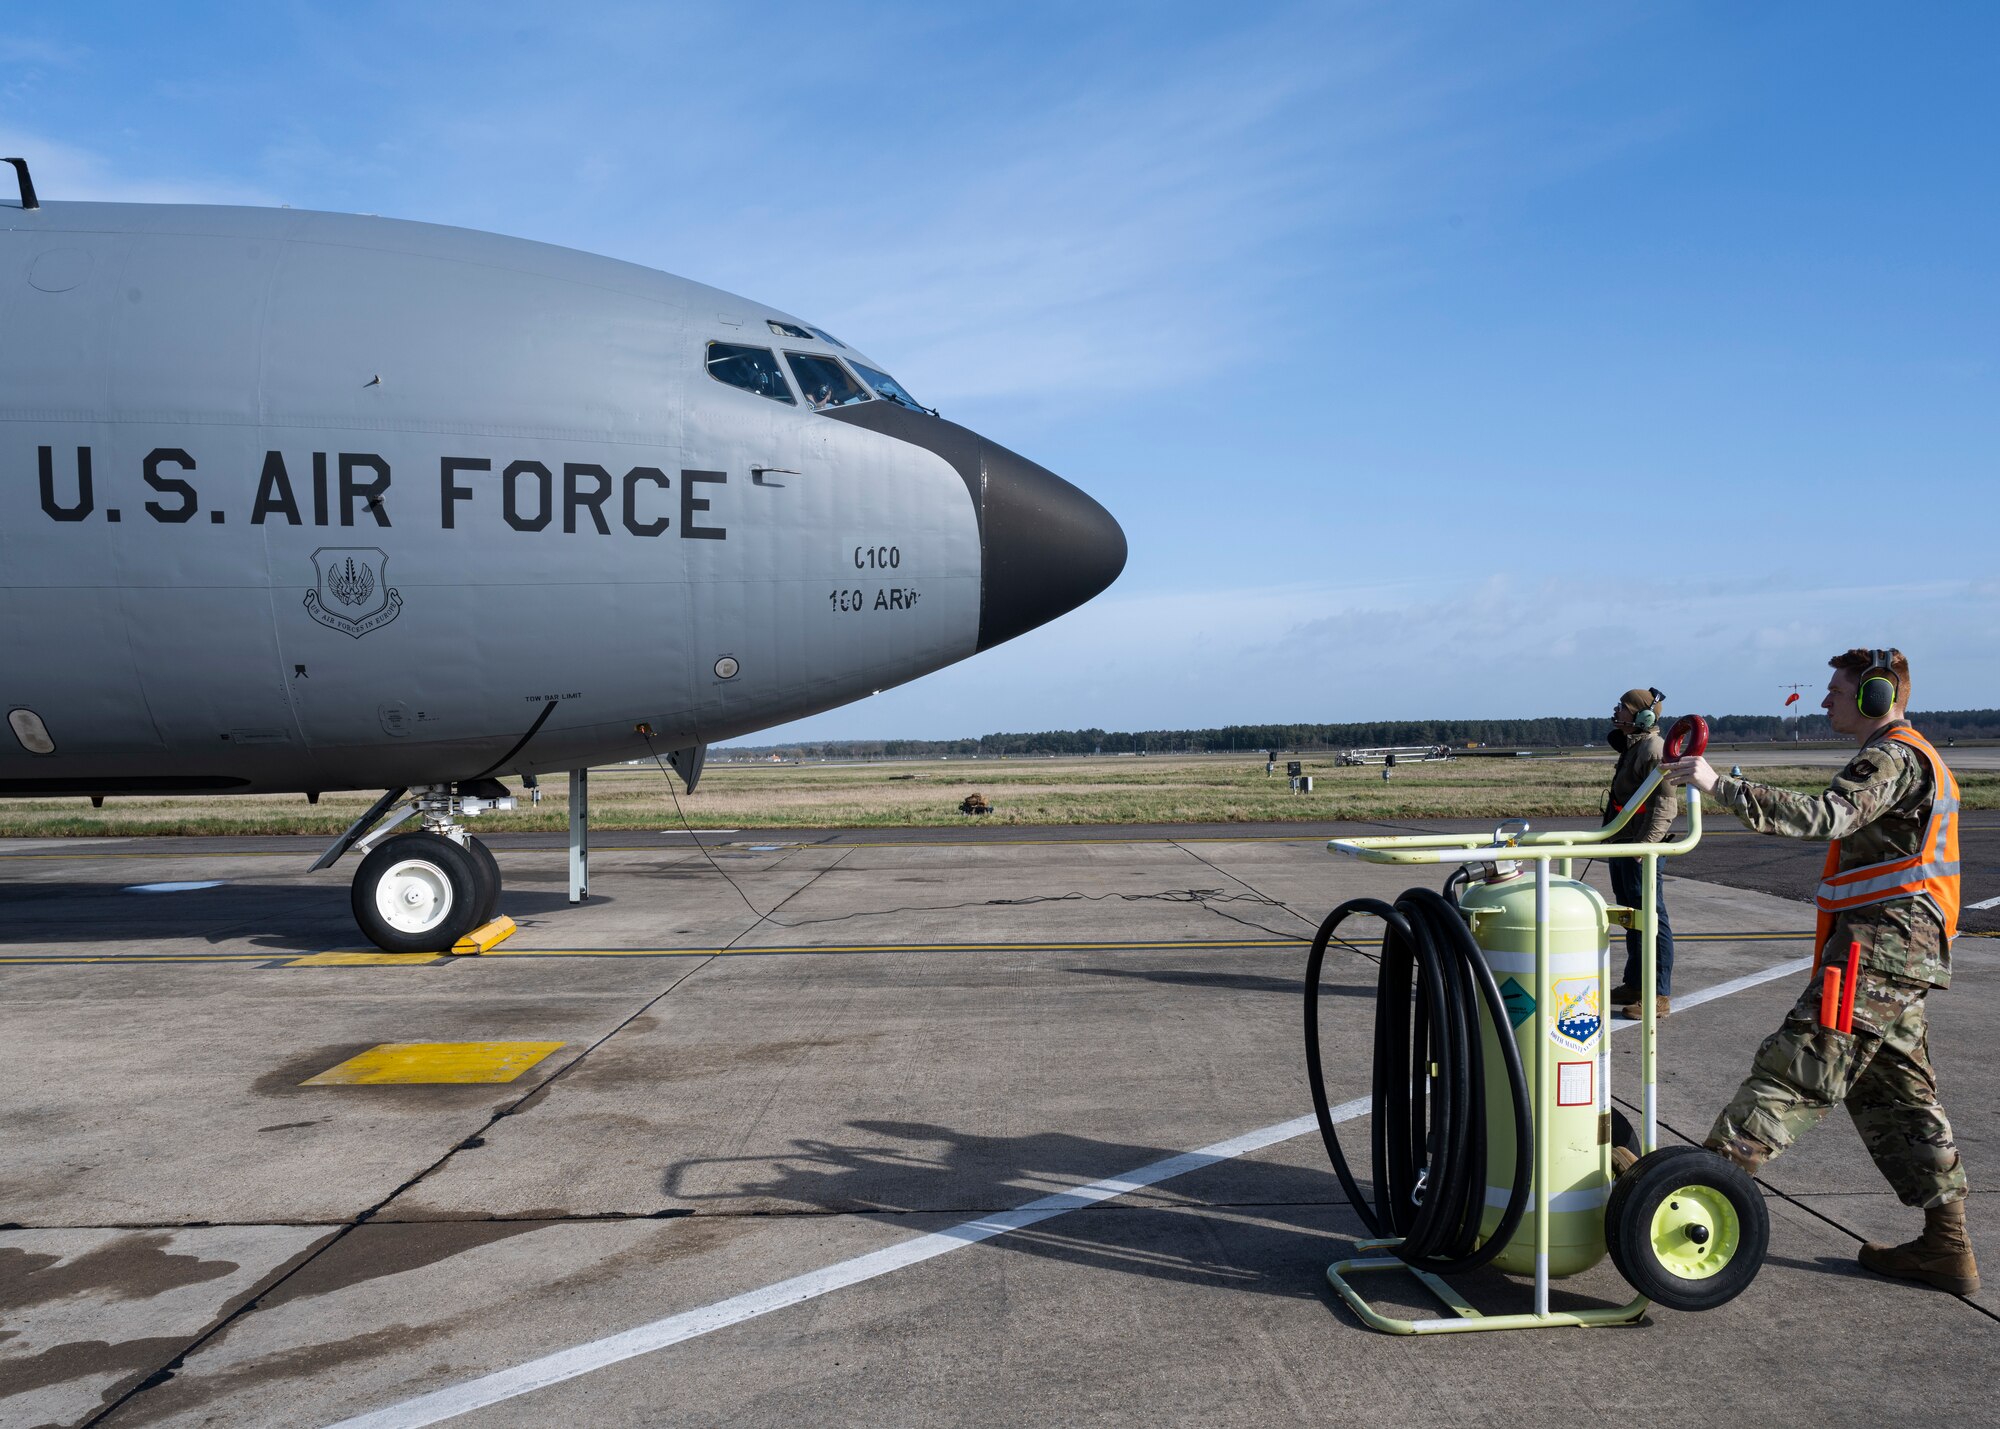 A U.S. Air Force Airmen assigned to the 100th Maintenance Squadron perform pre-flight checks on a KC-135 Stratotanker aircraft at Royal Air Force Mildenhall, England, Feb. 16, 2022. The 100th ARW is the only permanent U.S. air refueling wing in the European theater providing the critical air refueling "bridge" that enables the Expeditionary Air Force to deploy around the globe on a moment's notice.